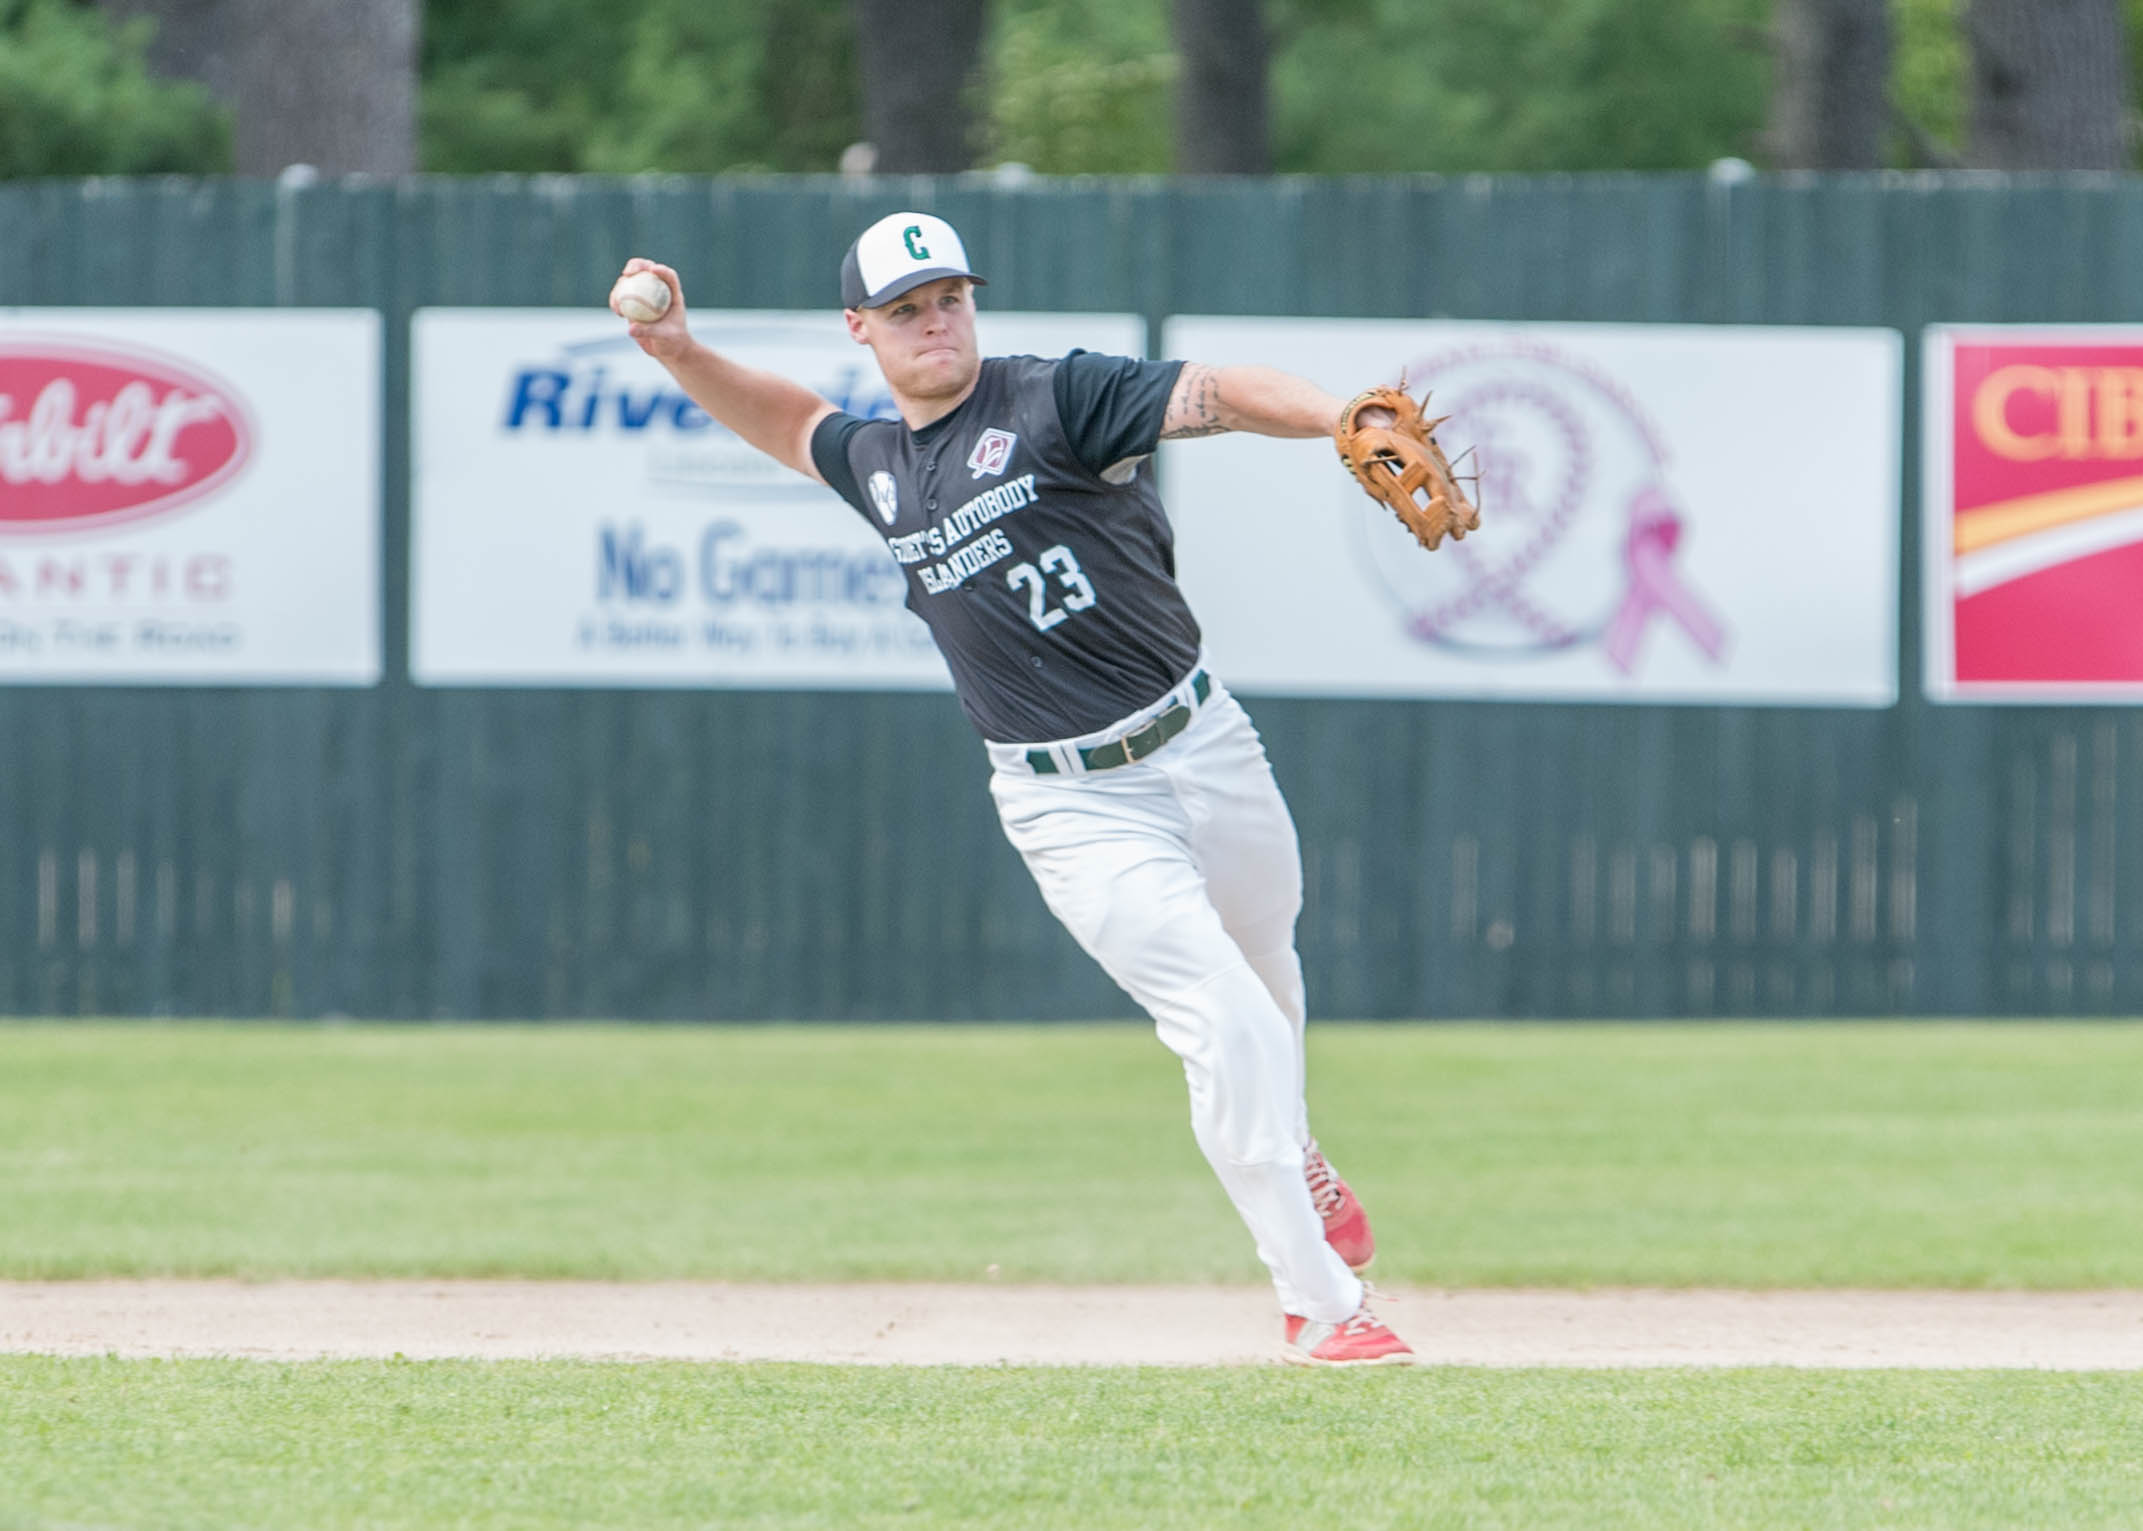 Baseball Canada Championships: Lots of action on Day 1